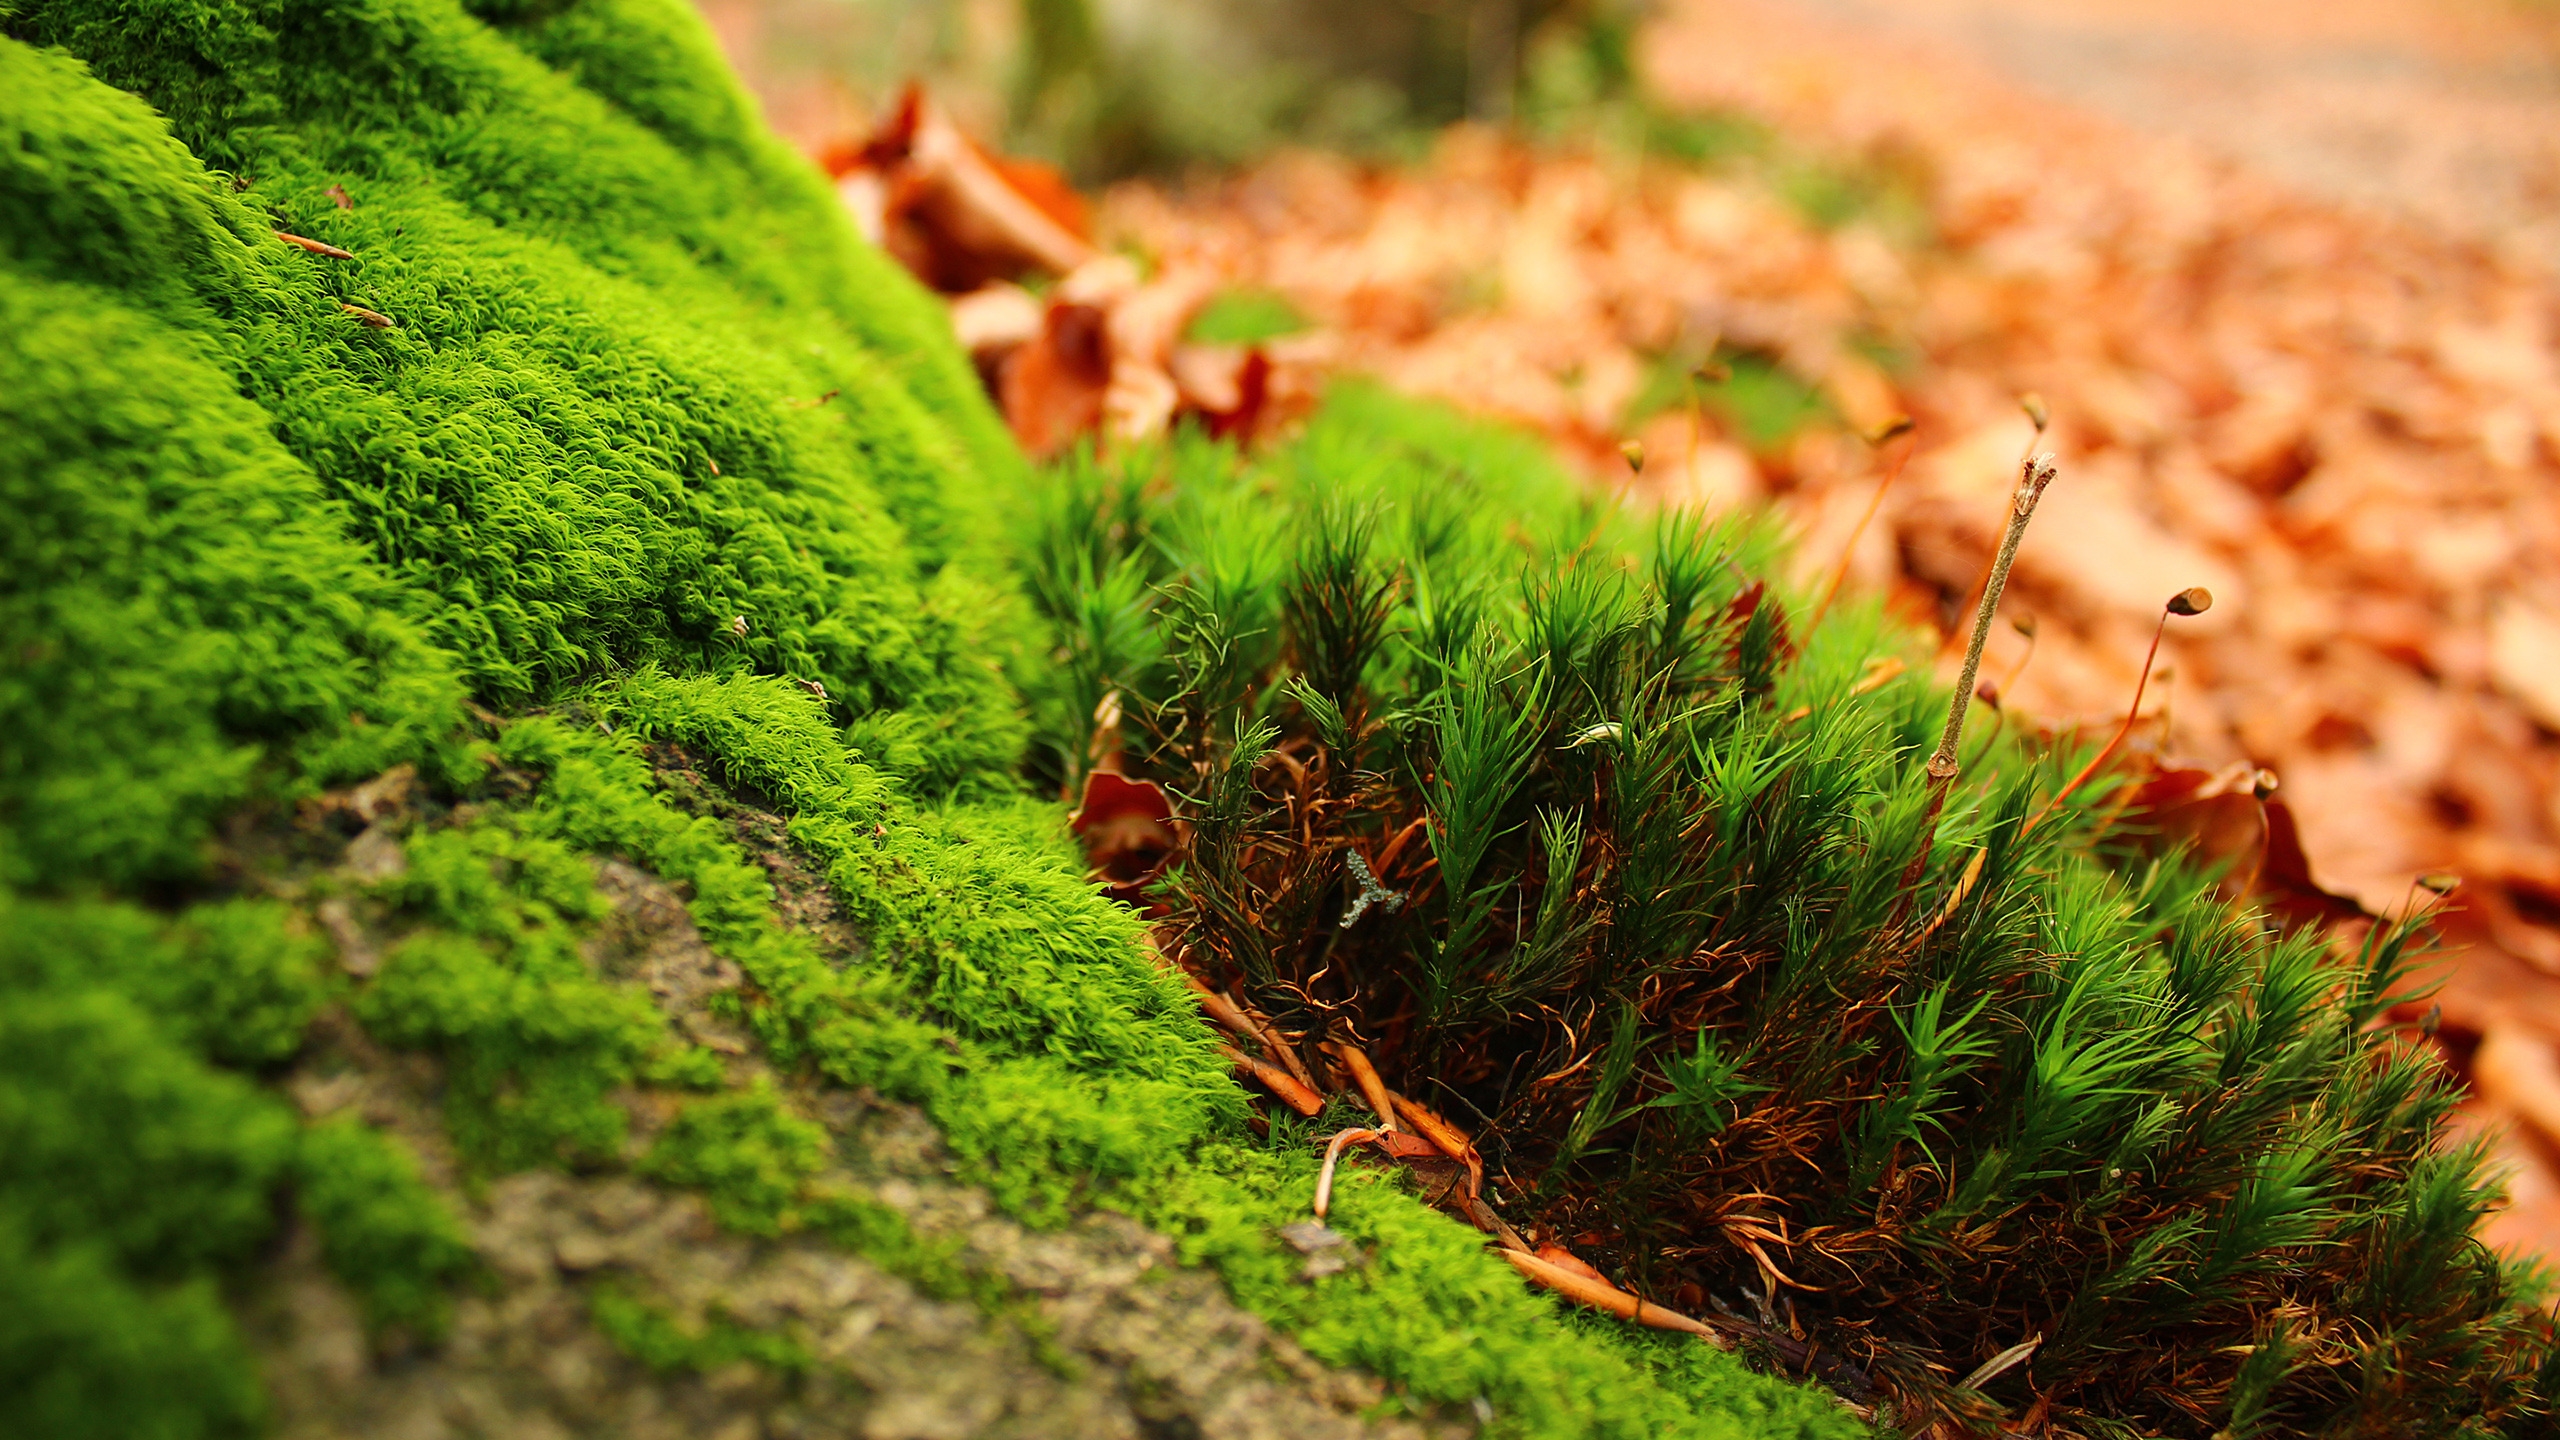 Amazing Moss for 2560x1440 HDTV resolution